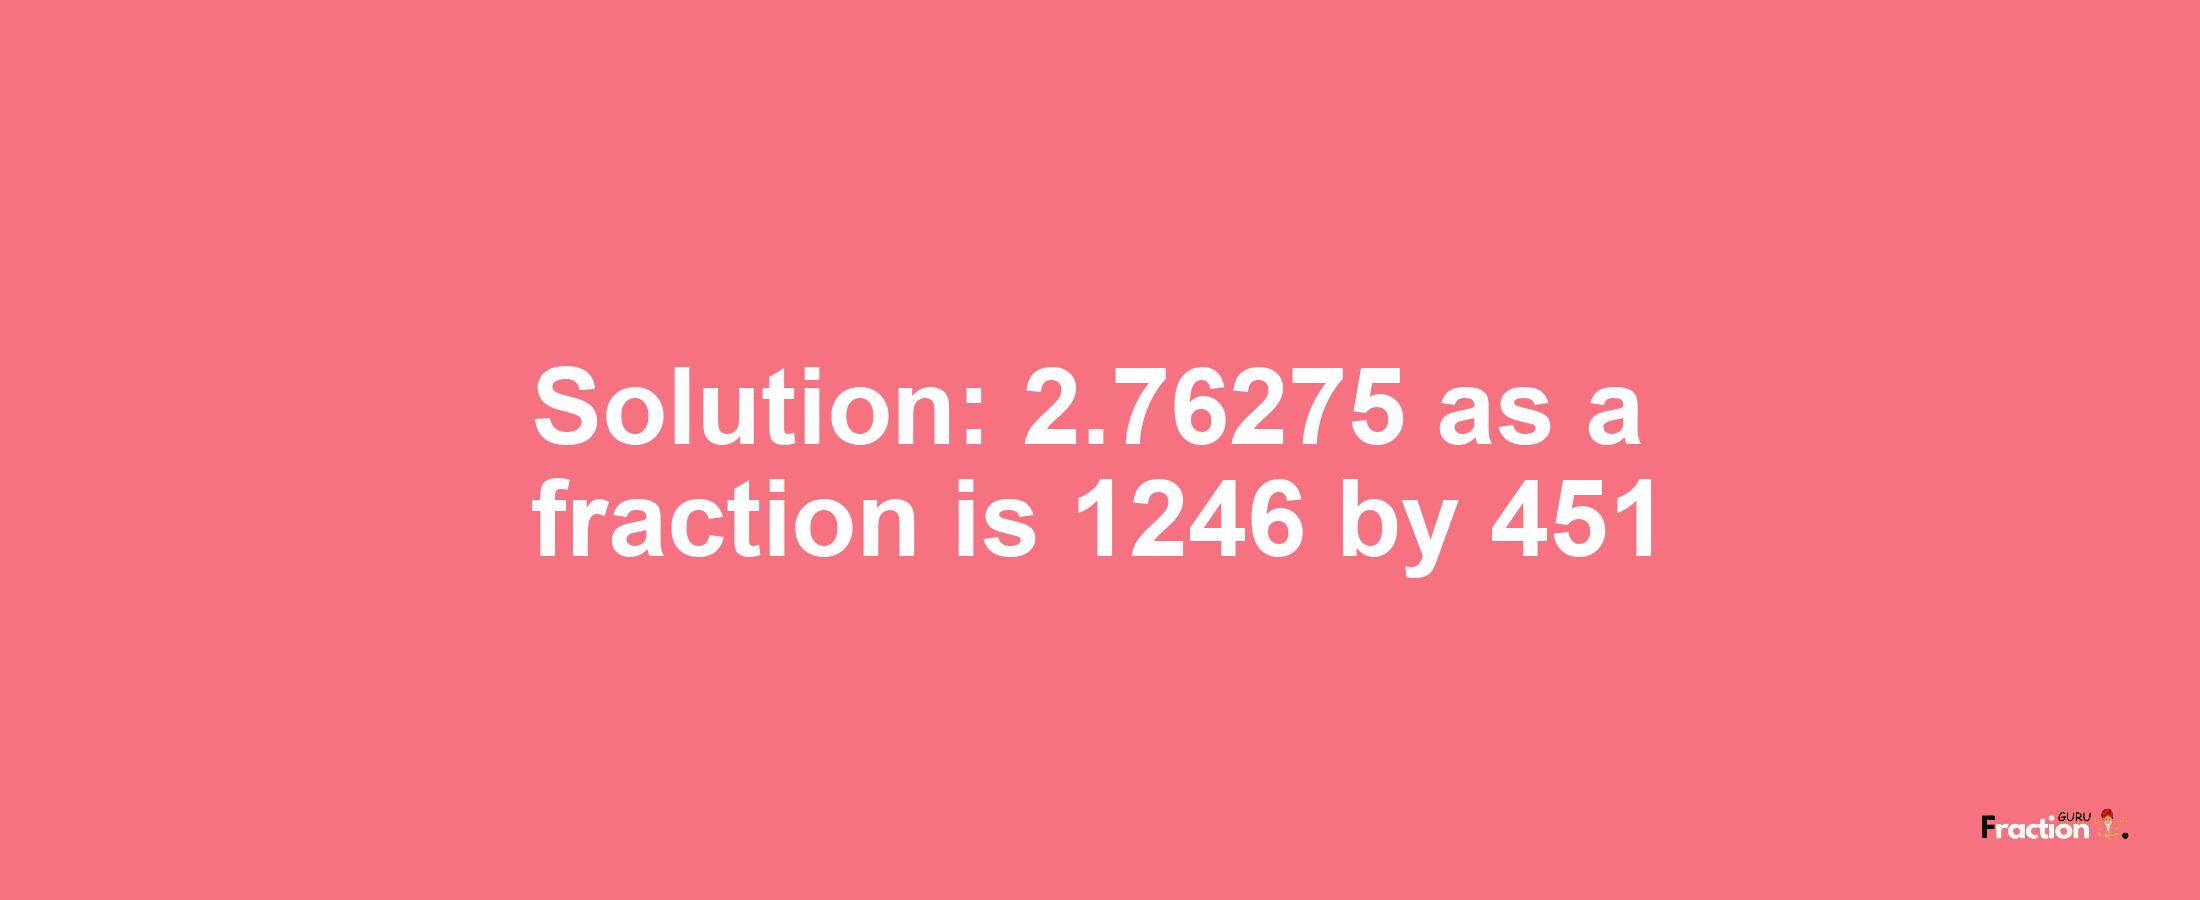 Solution:2.76275 as a fraction is 1246/451